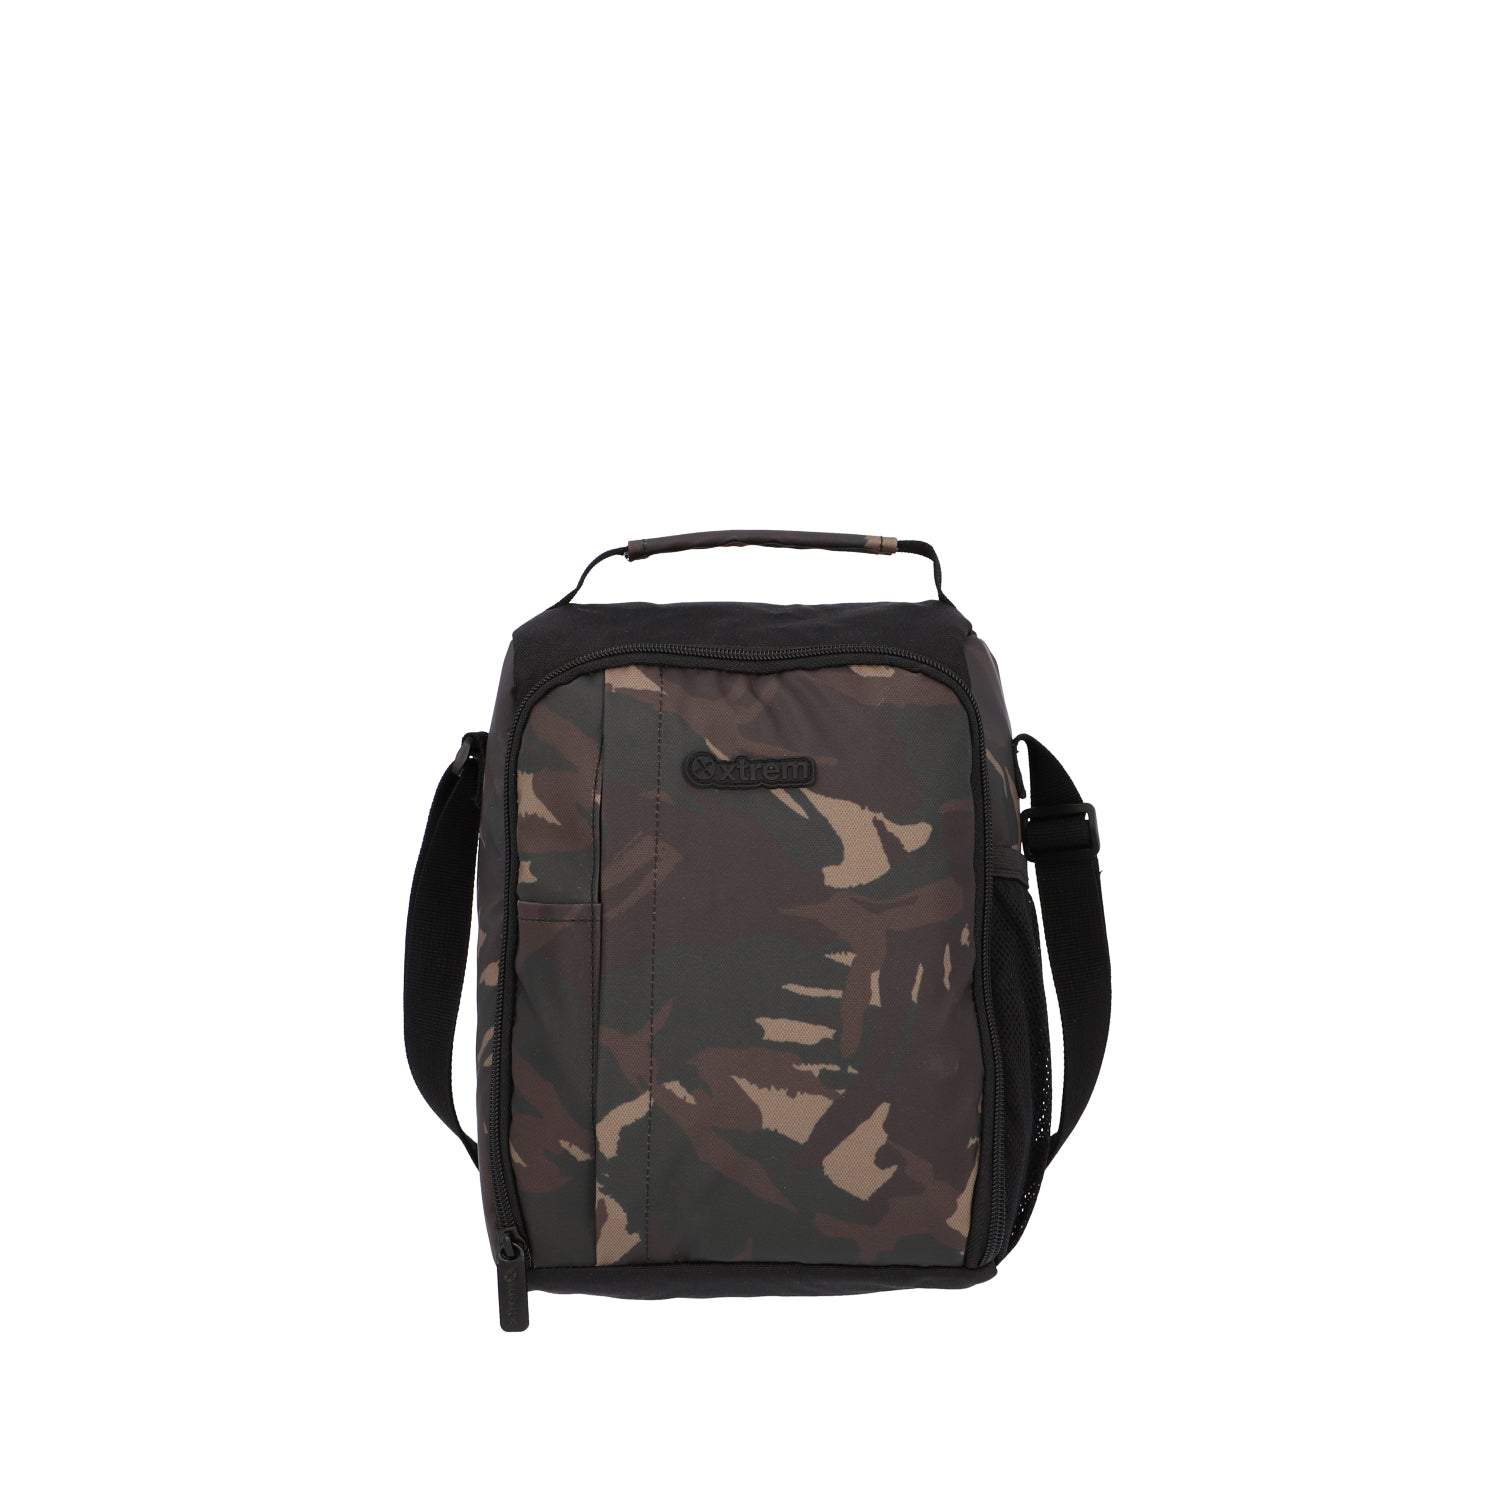 Lonchera Lunch Bag Lunch 201 Olive Camo